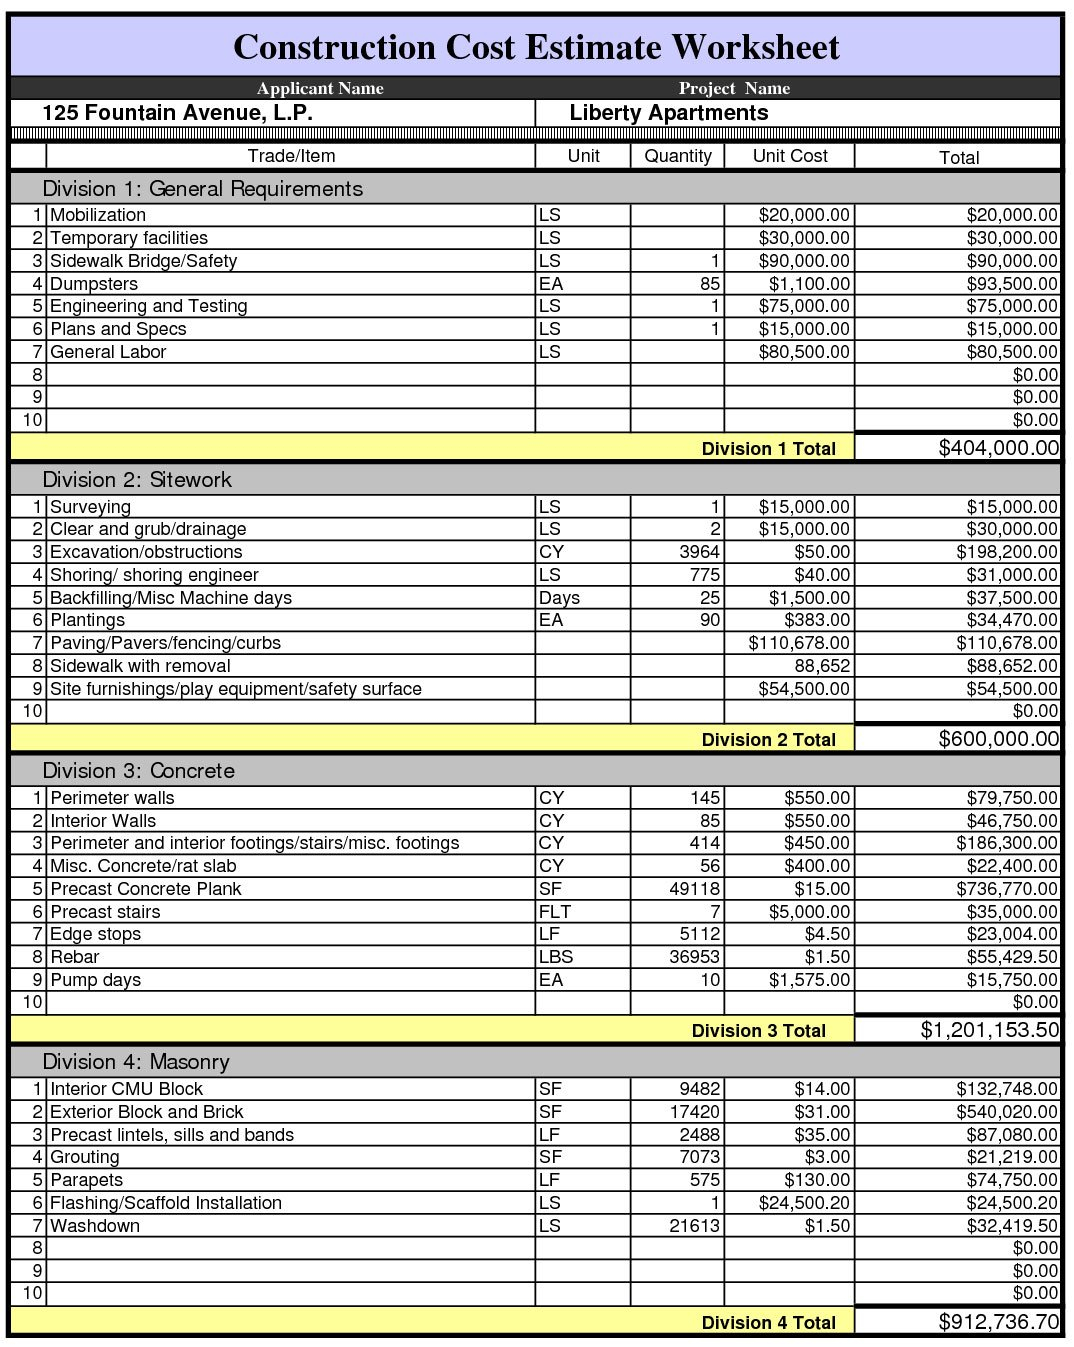 Cost Estimate Spreadsheet   Demir.iso Consulting.co In Estimating Spreadsheet Template